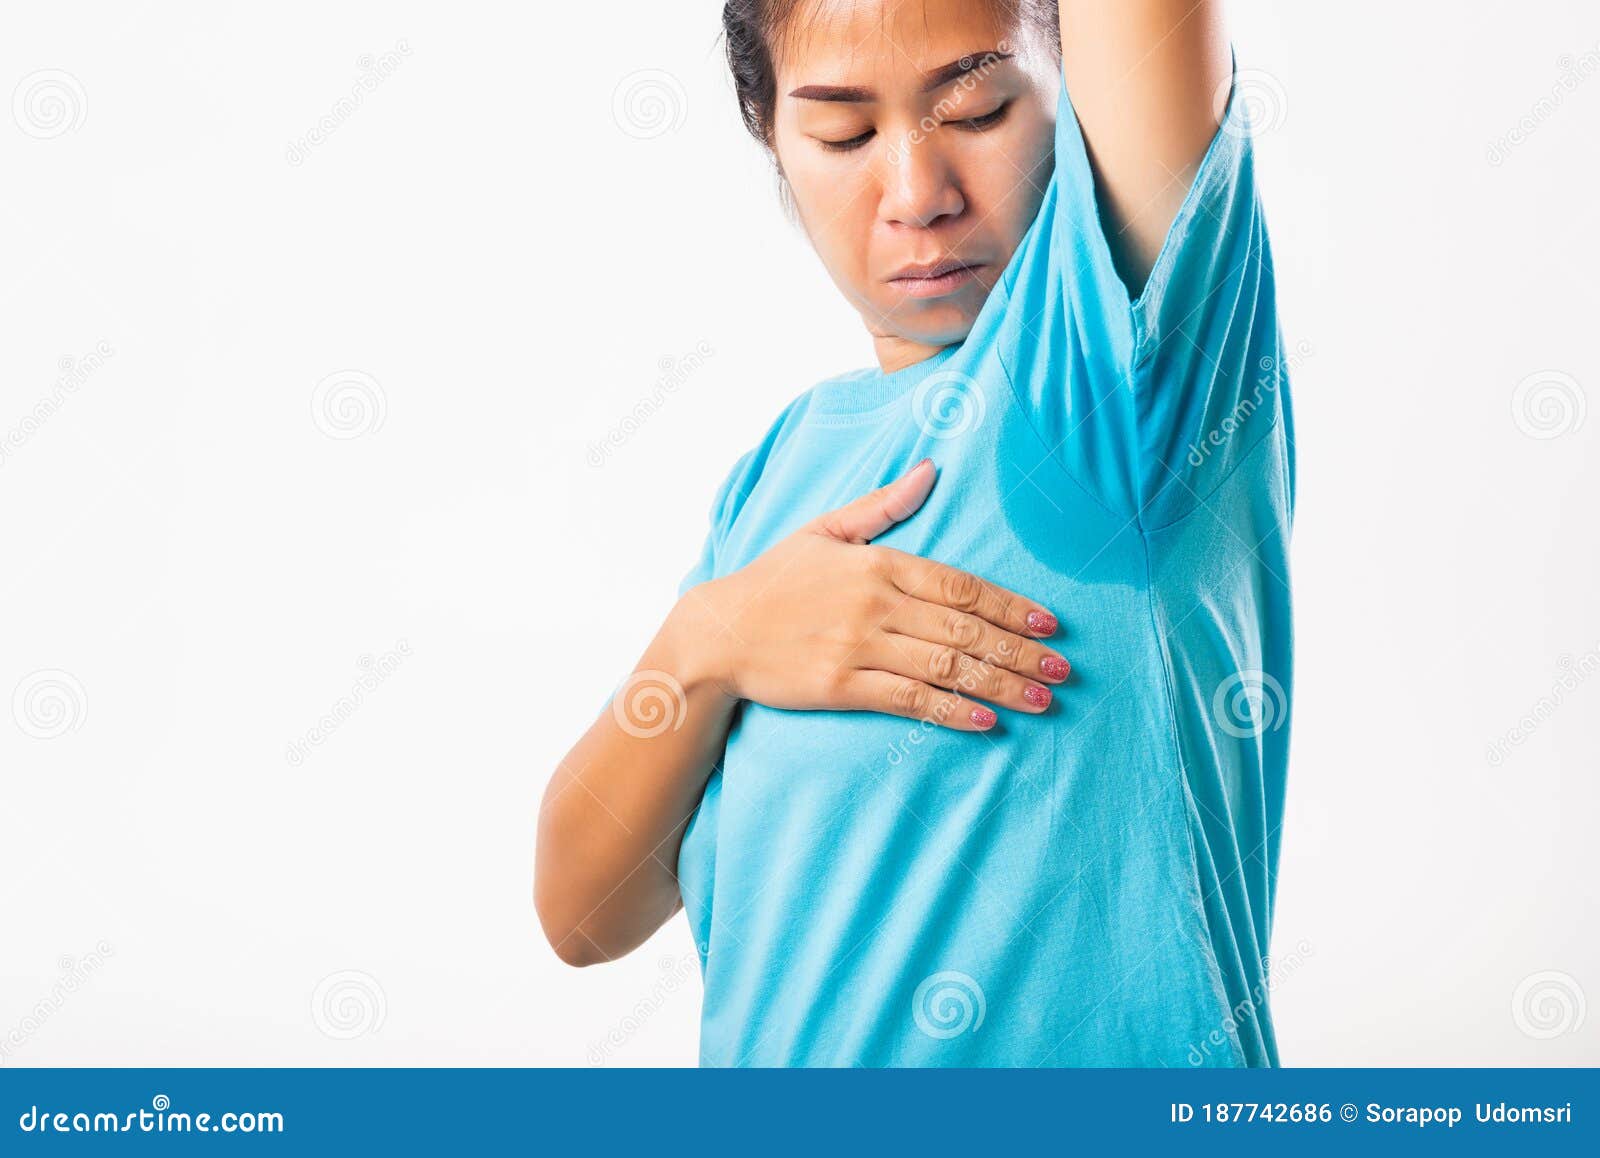 Female Very Badly Have Armpit Sweat Stain On Her Clothes Stock Photo